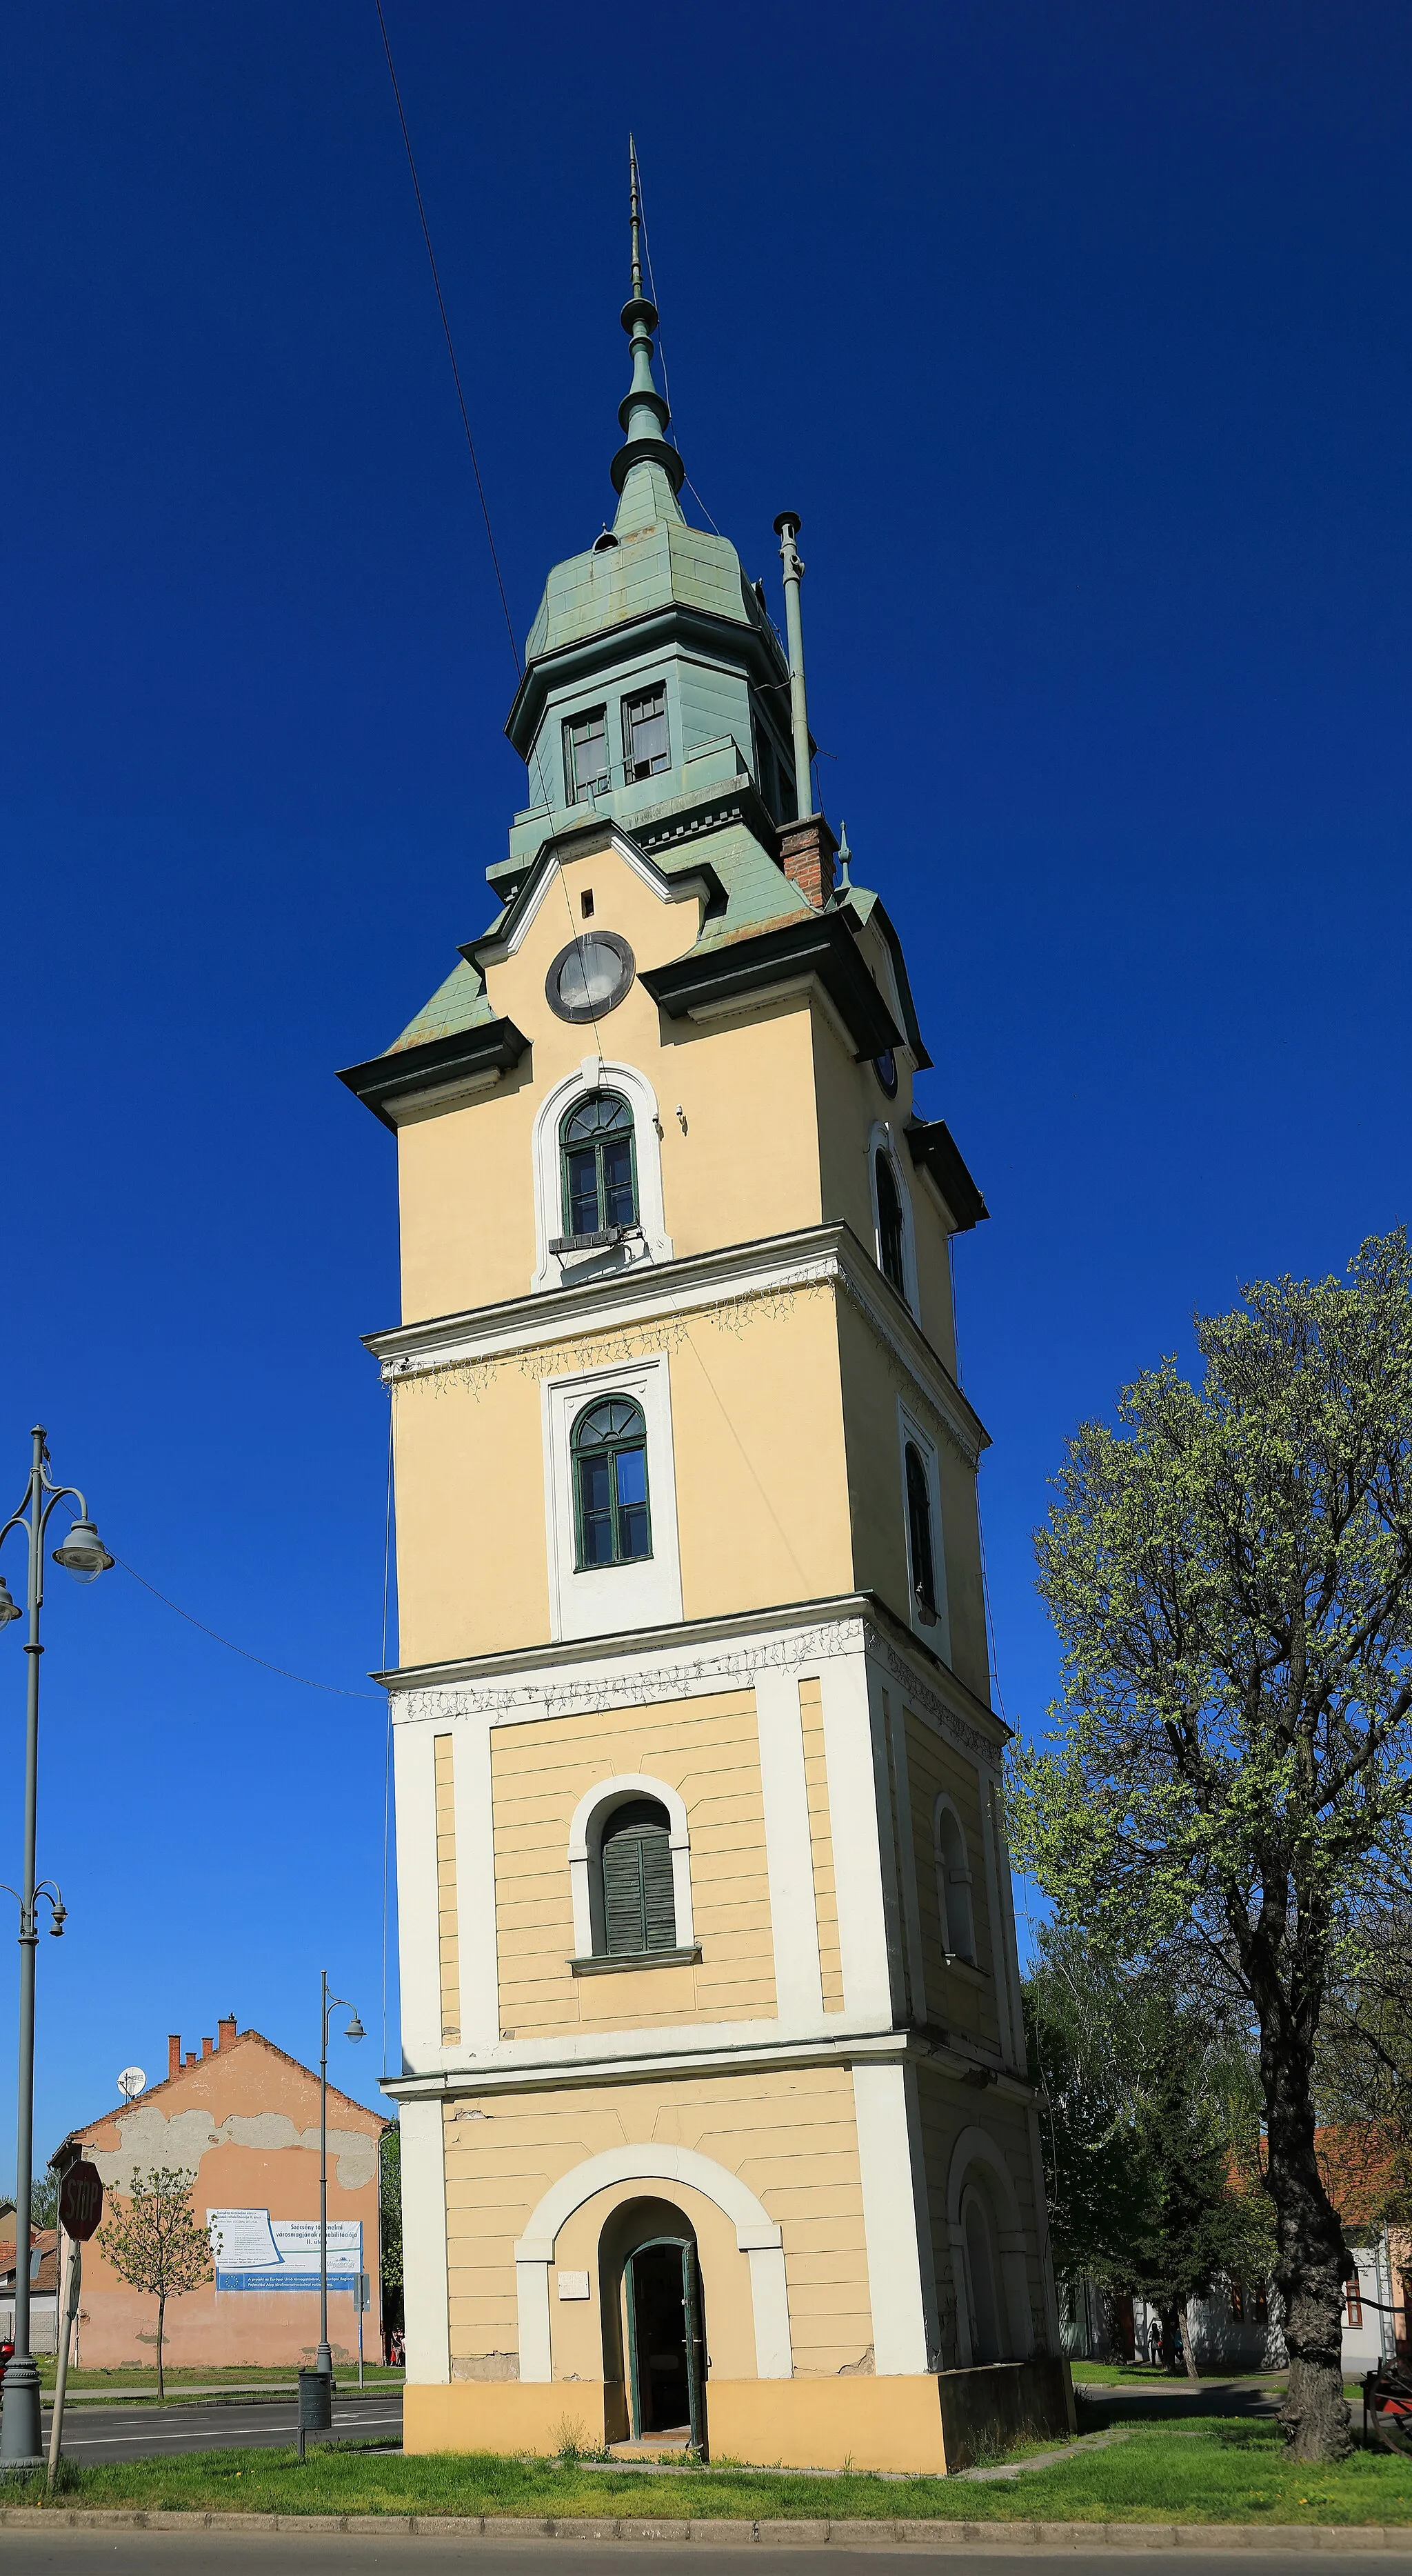 Photo showing: The Szécsény Fire Tower built in the 18th century and got its current shape in 1893. It has a lean of 3 degrees, 0,9° less than the fammous Leaning Tower in Pisa.